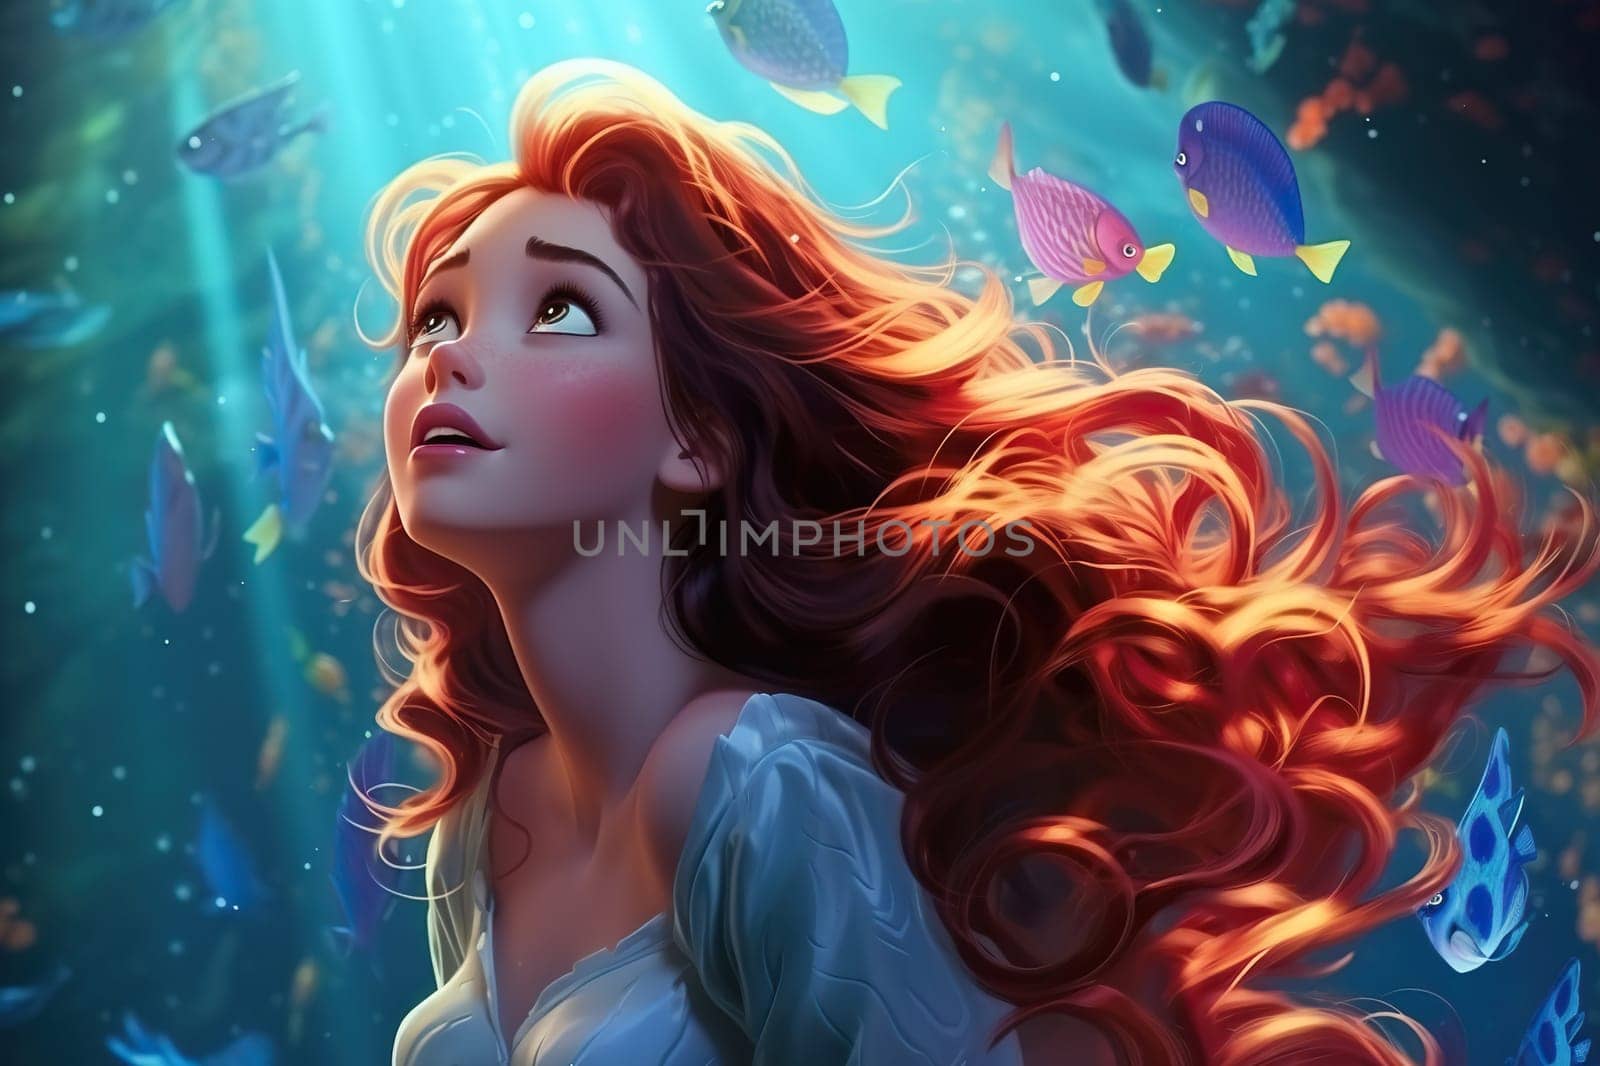 Girl, little mermaid underwater in the rays of the sun.